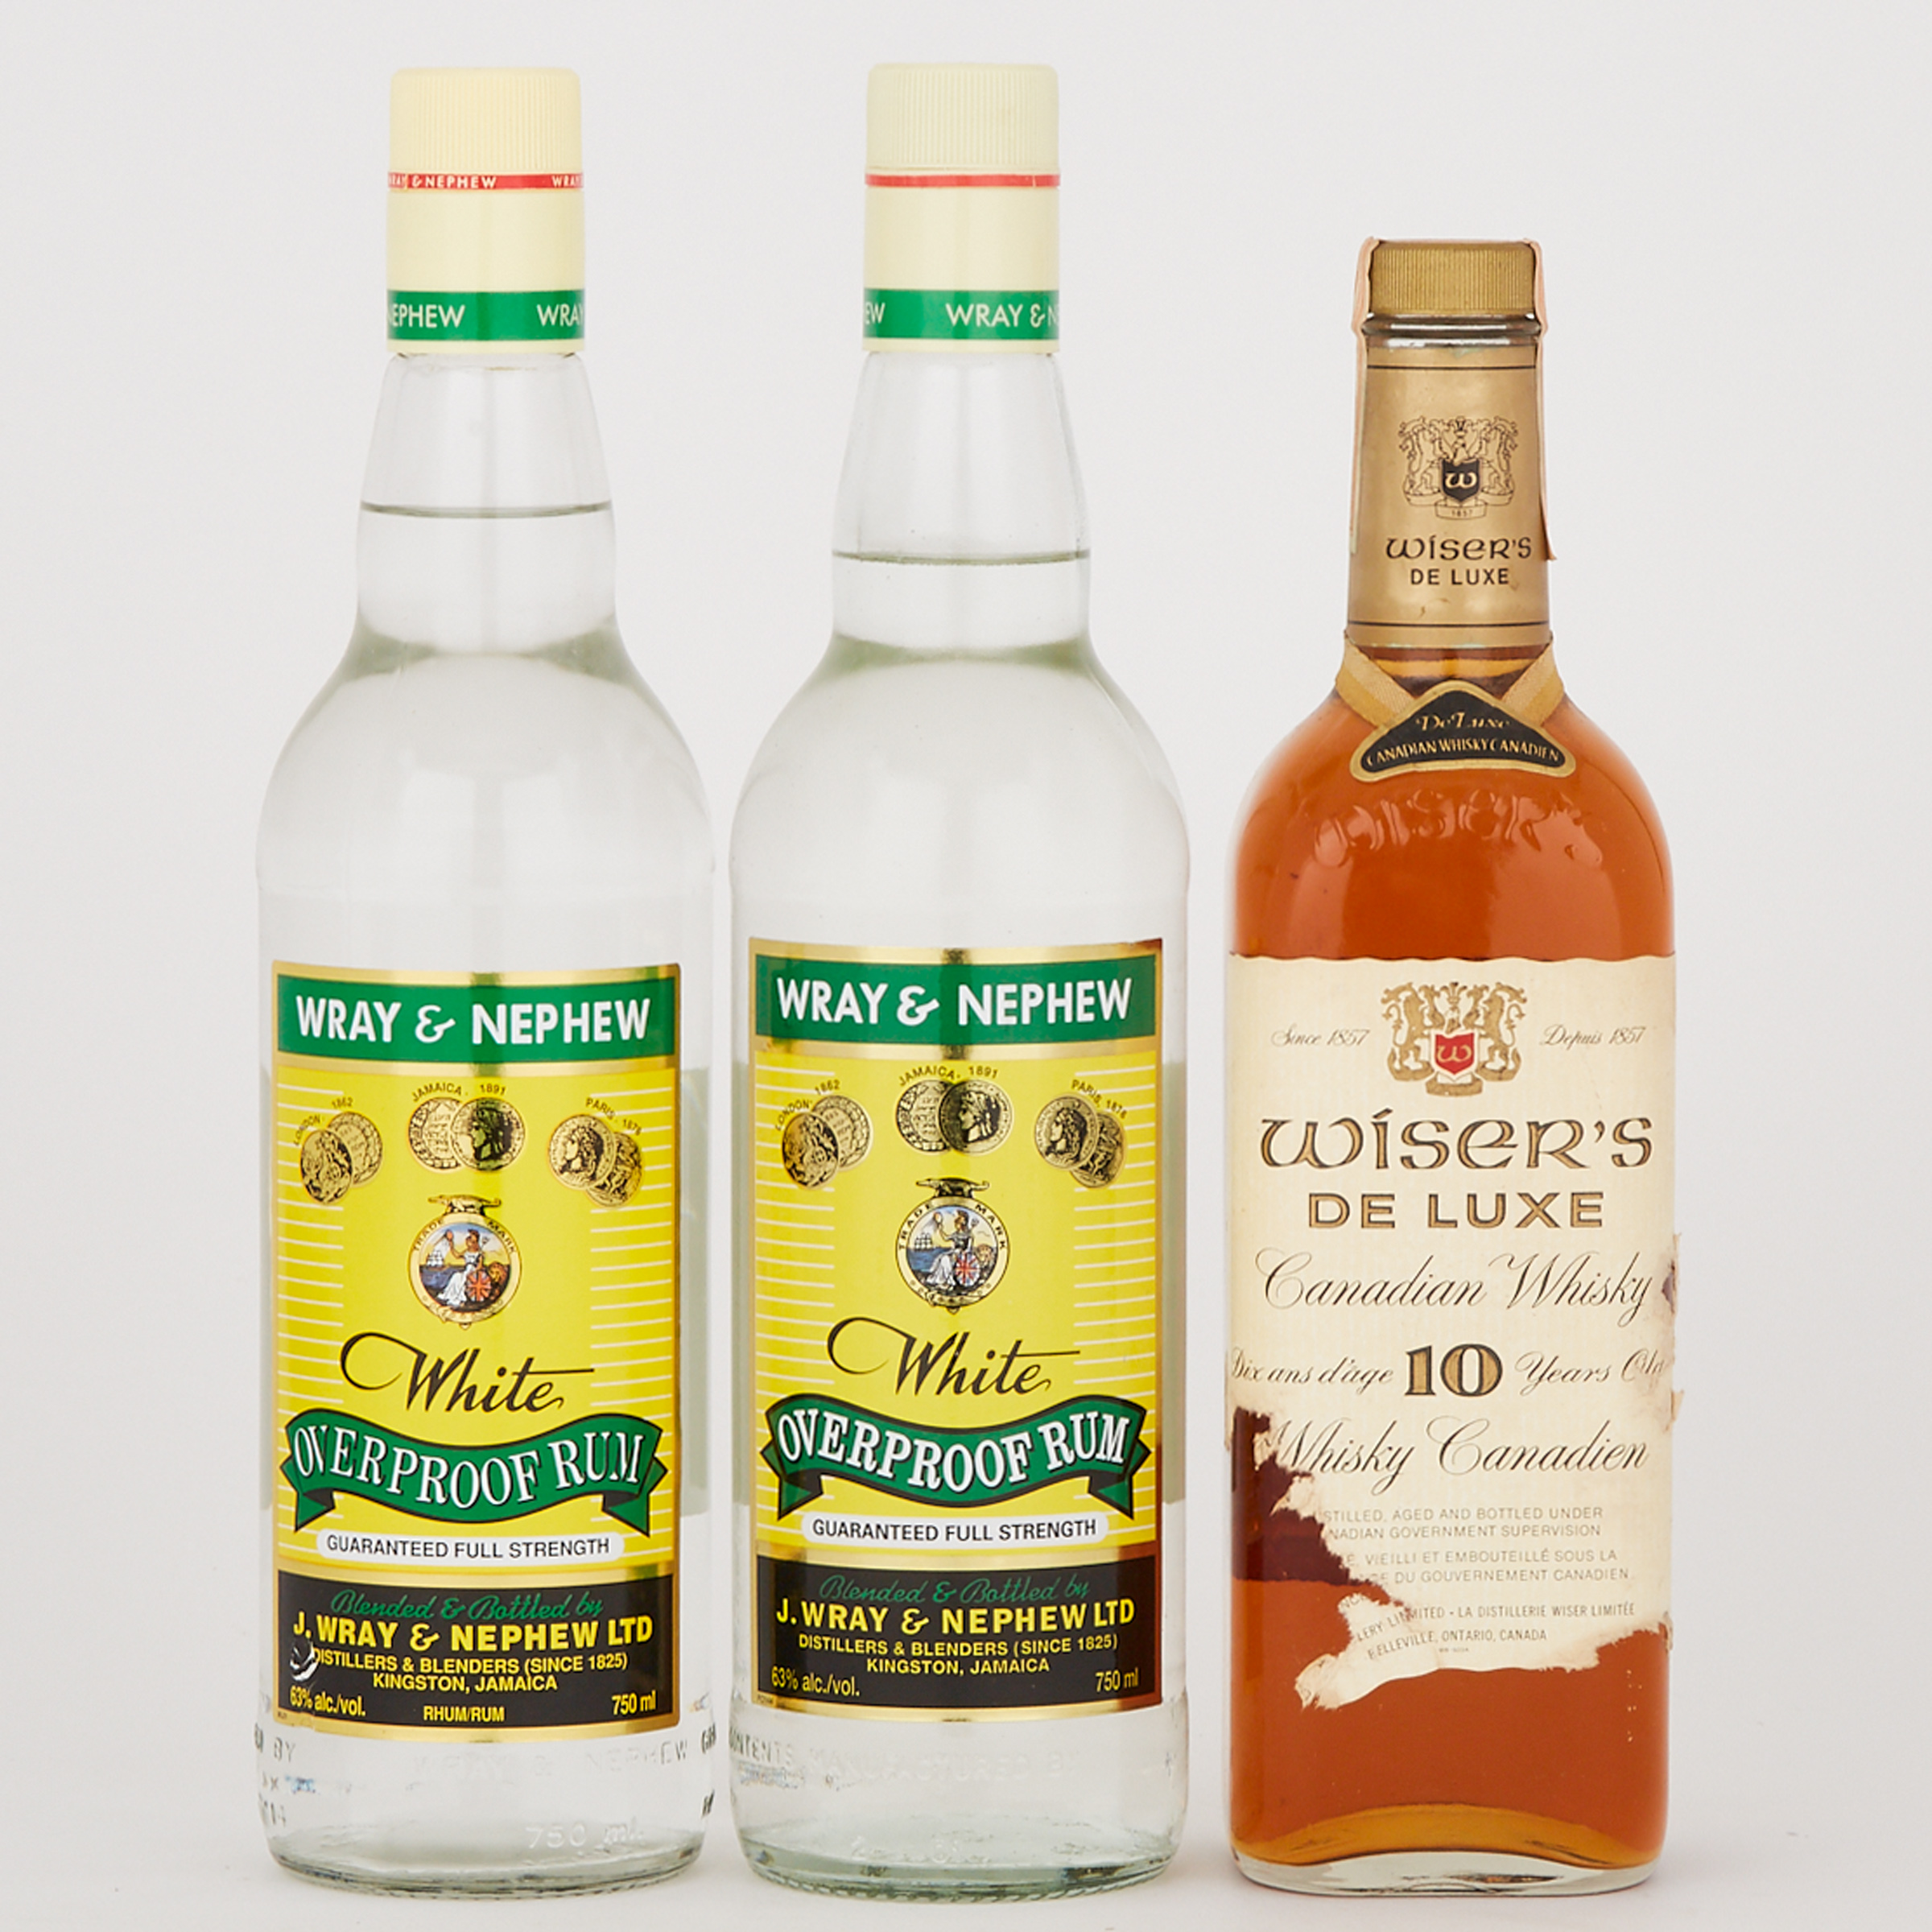 WISERS DELUX CANADIAN WHISKY 10 YRS (ONE 750 ML)
WRAY & NEPHEW WHITE OVERPROOF RUM (ONE 750 ML)
WRAY & NEPHEW WHITE OVERPROOF RUM (ONE 750 ML)